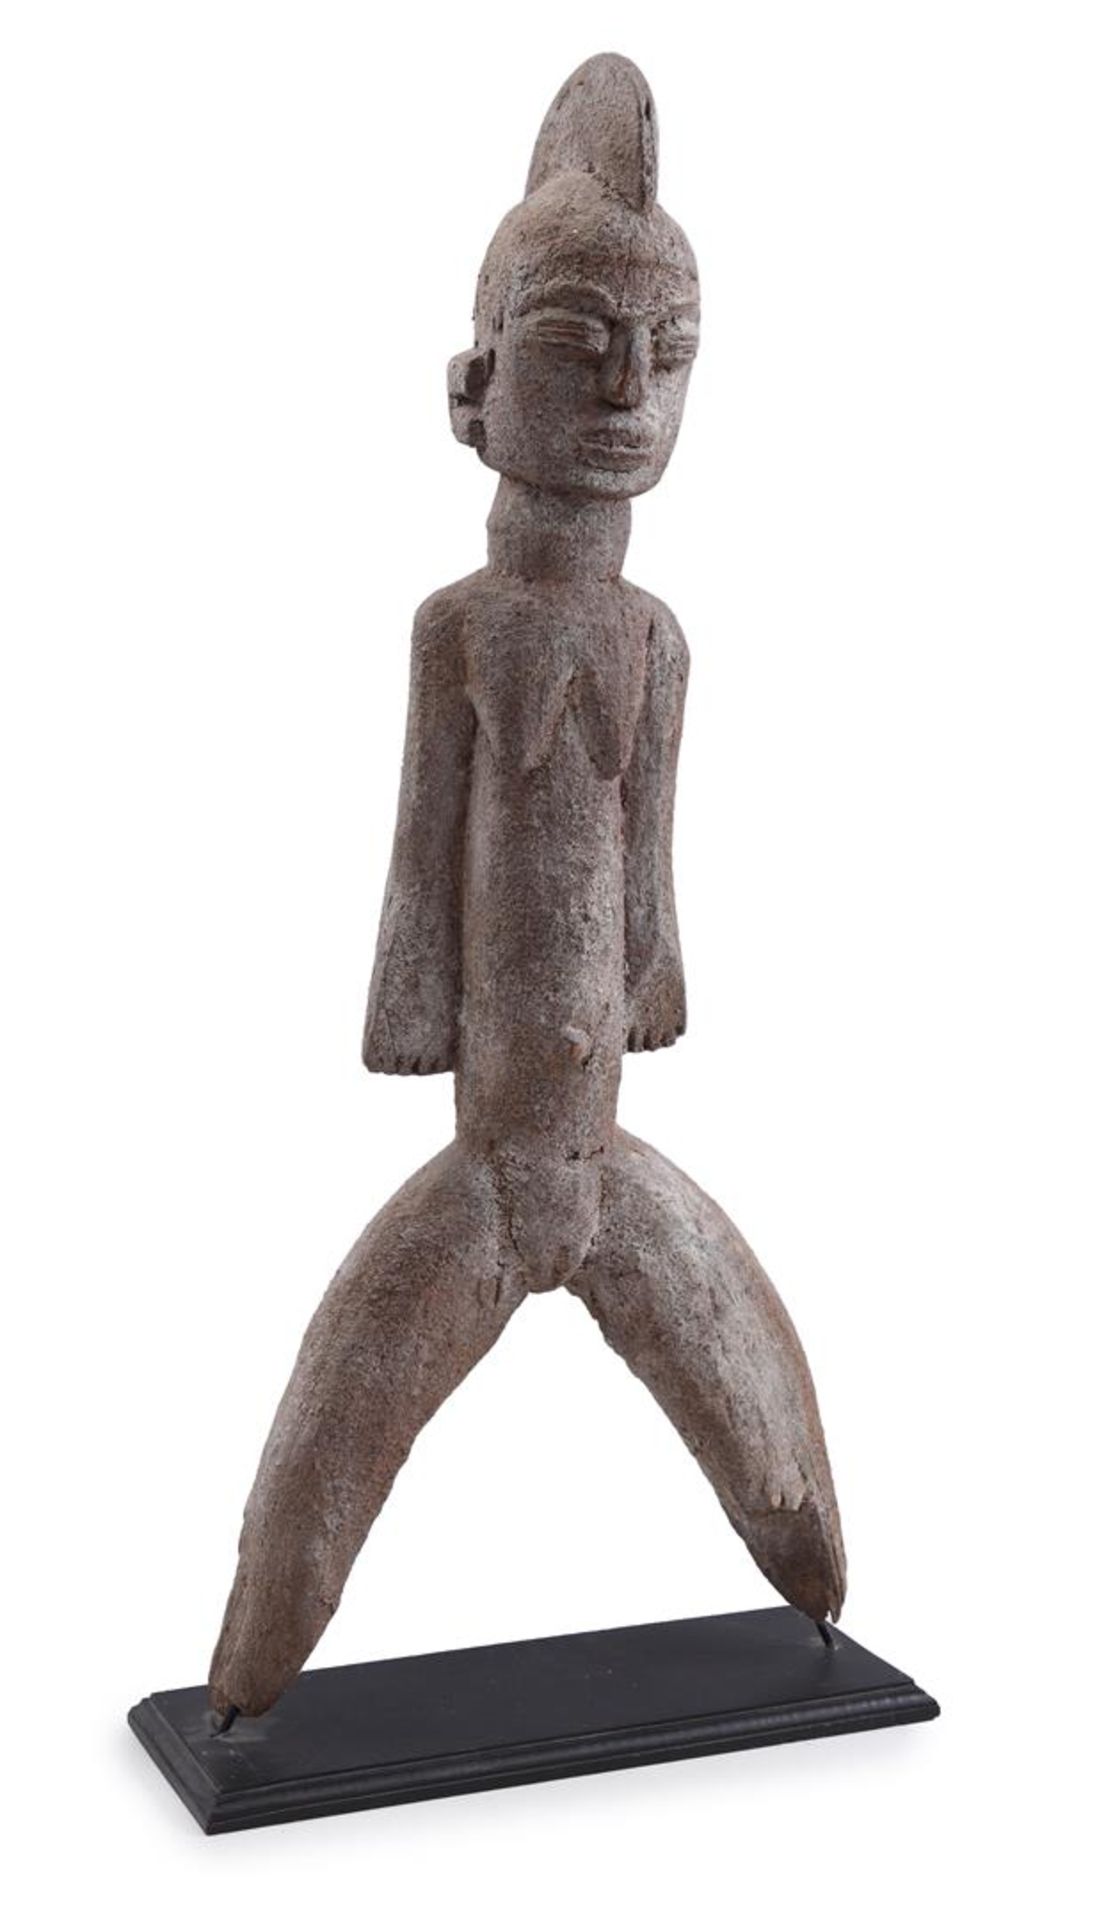 Wooden statue of a person, Dogon Africa